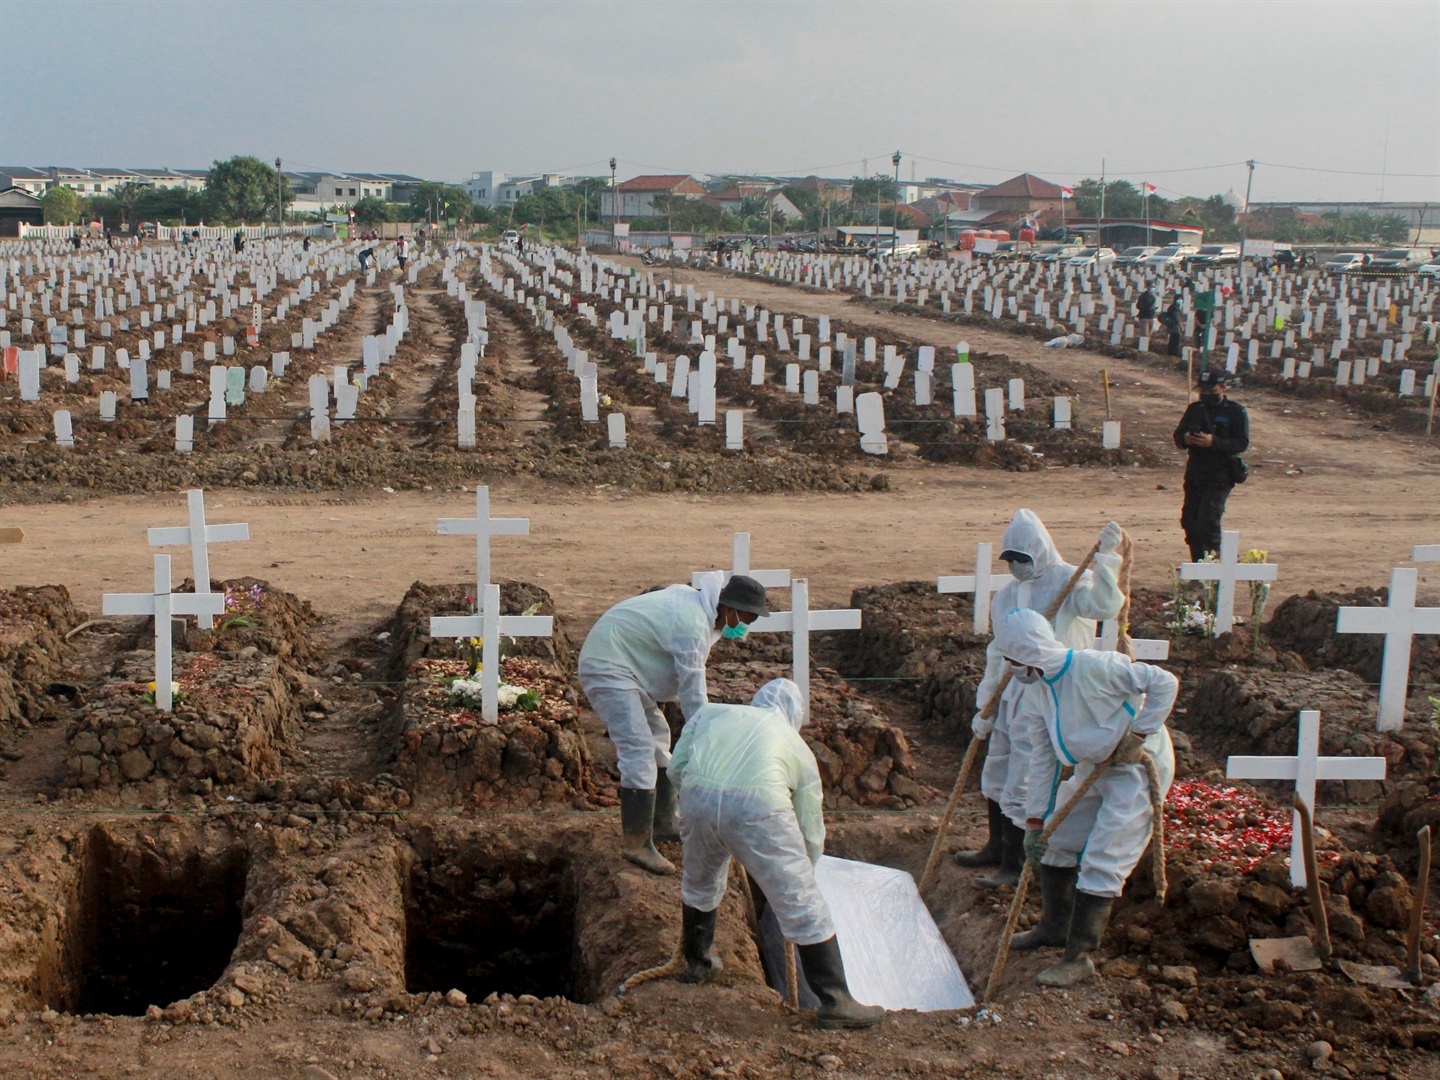 Grave officials are seen burying victims who died due to Covid-19 at a special cemetery in Rorotan, Jakarta, Indonesia on August 8, 2021.